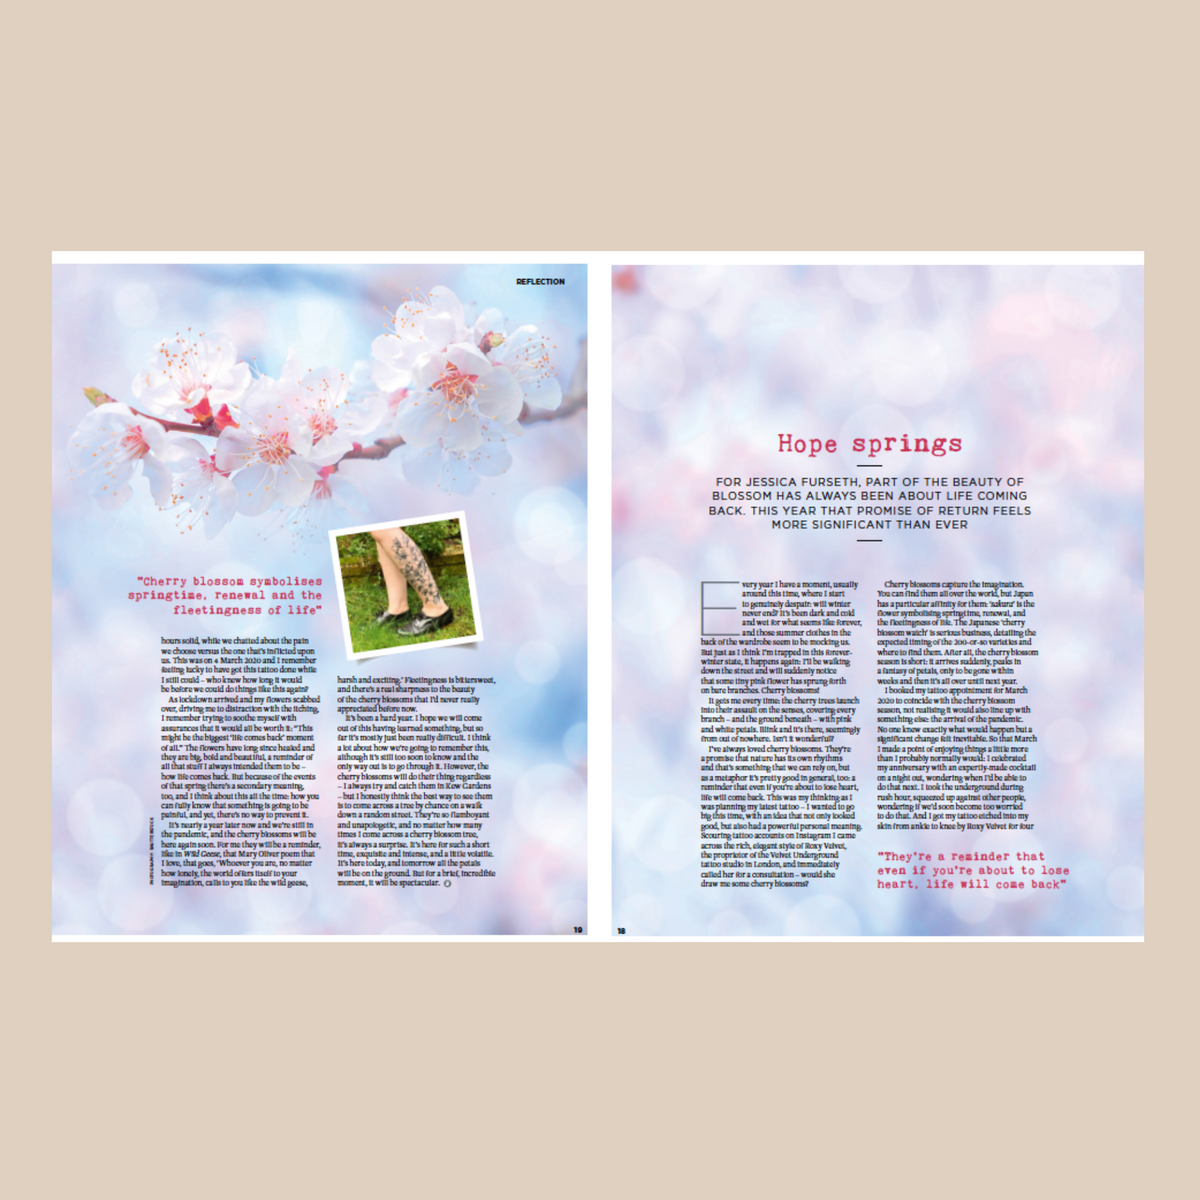 The Simple Things Issue 105 March